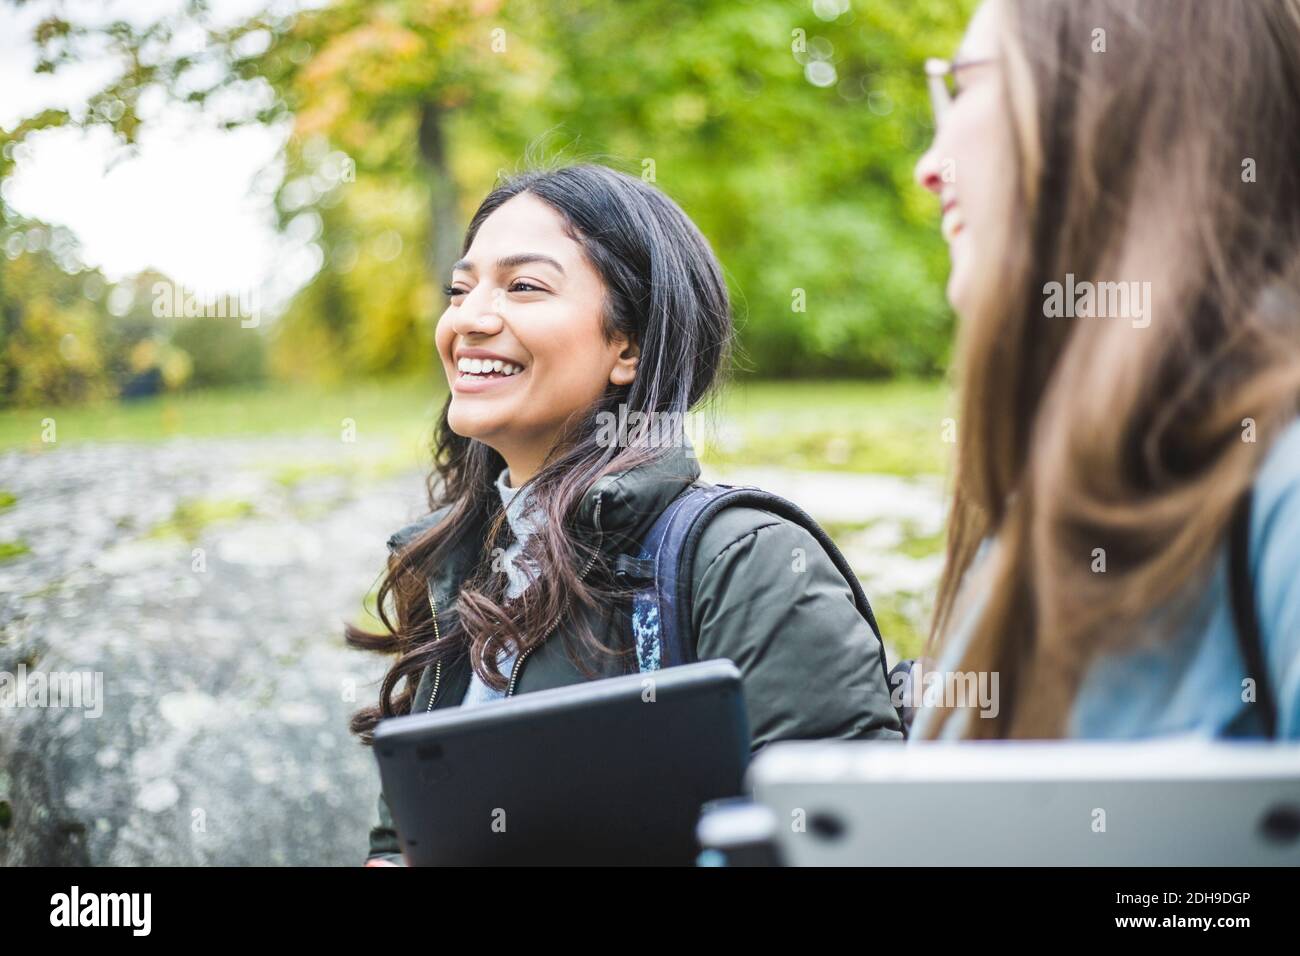 Smiling young woman with female friend in university campus Stock Photo